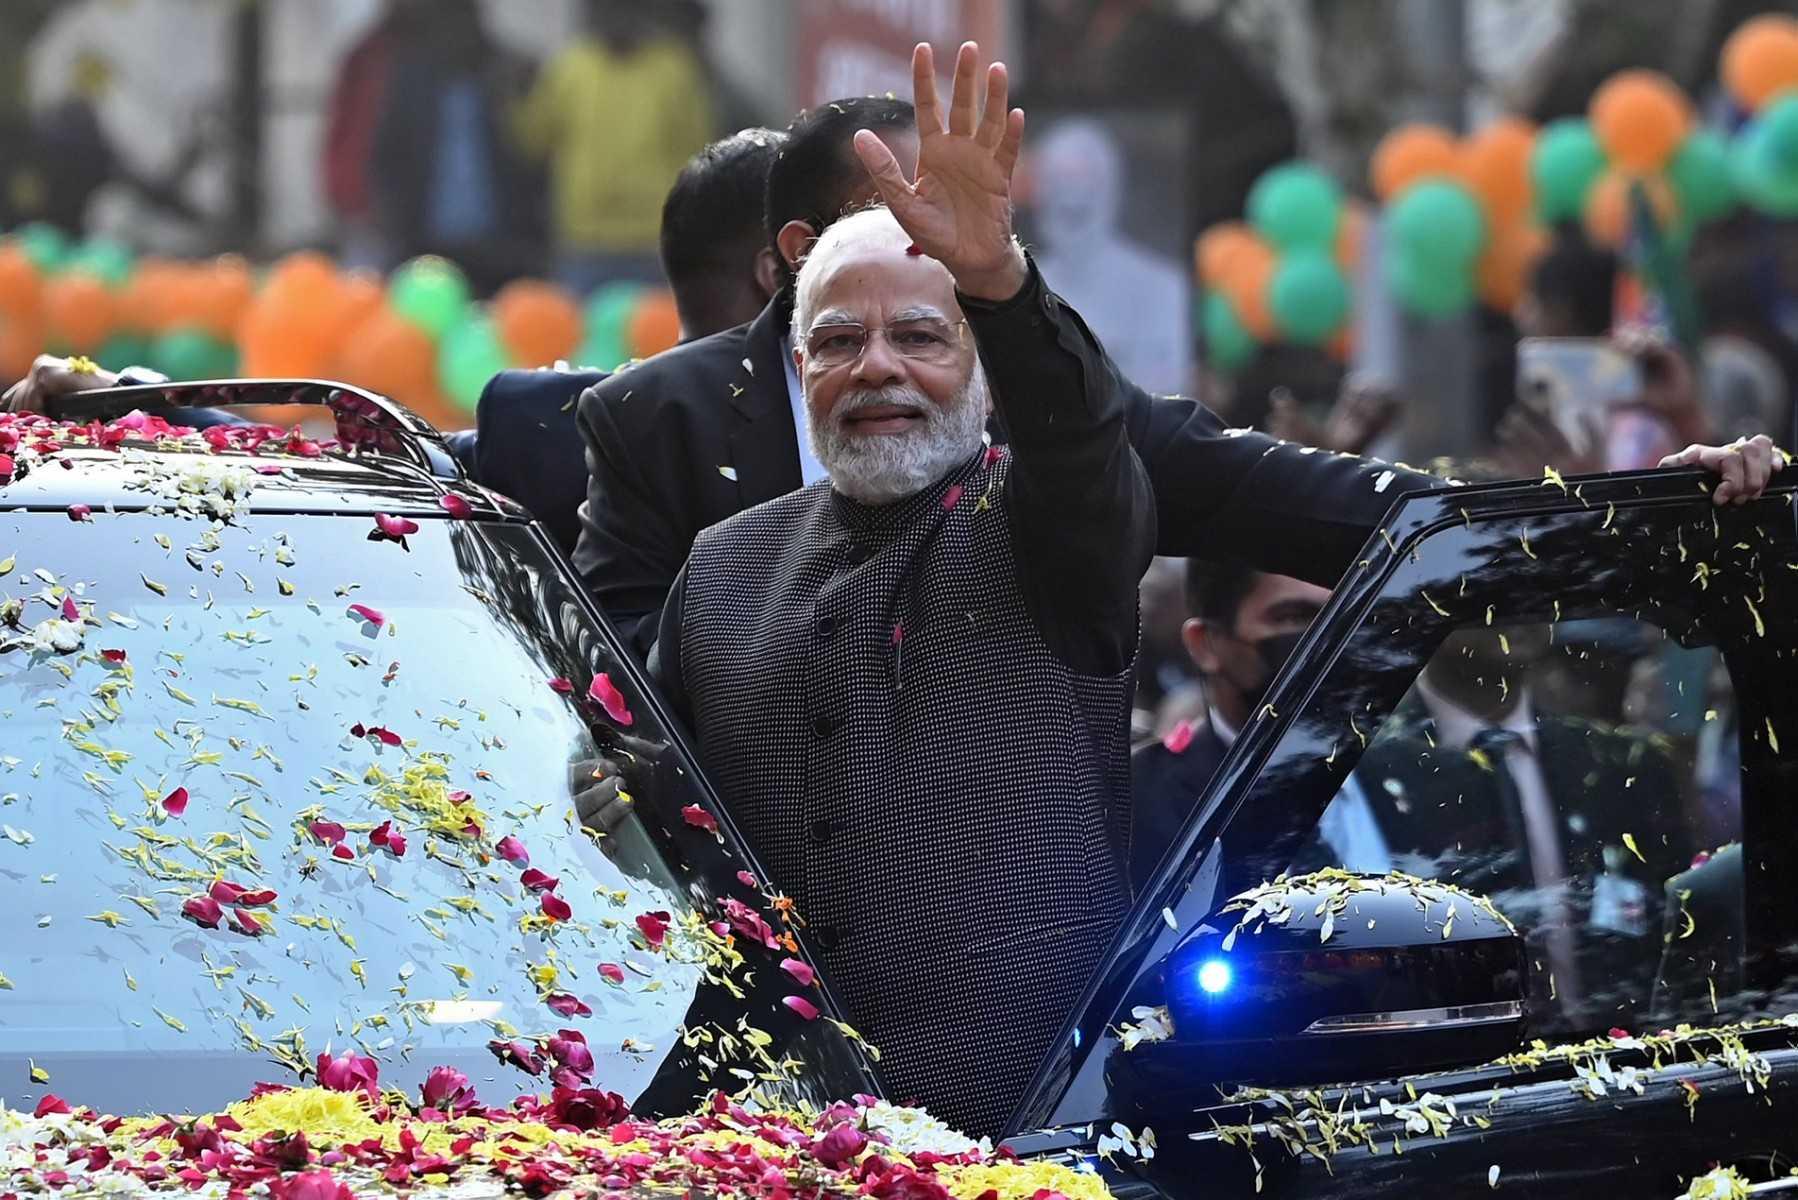 India's Prime Minister Narendra Modi waves to his supporters during a roadshow ahead of the BJP national executive meet in New Delhi on Jan 16. Photo: AFP